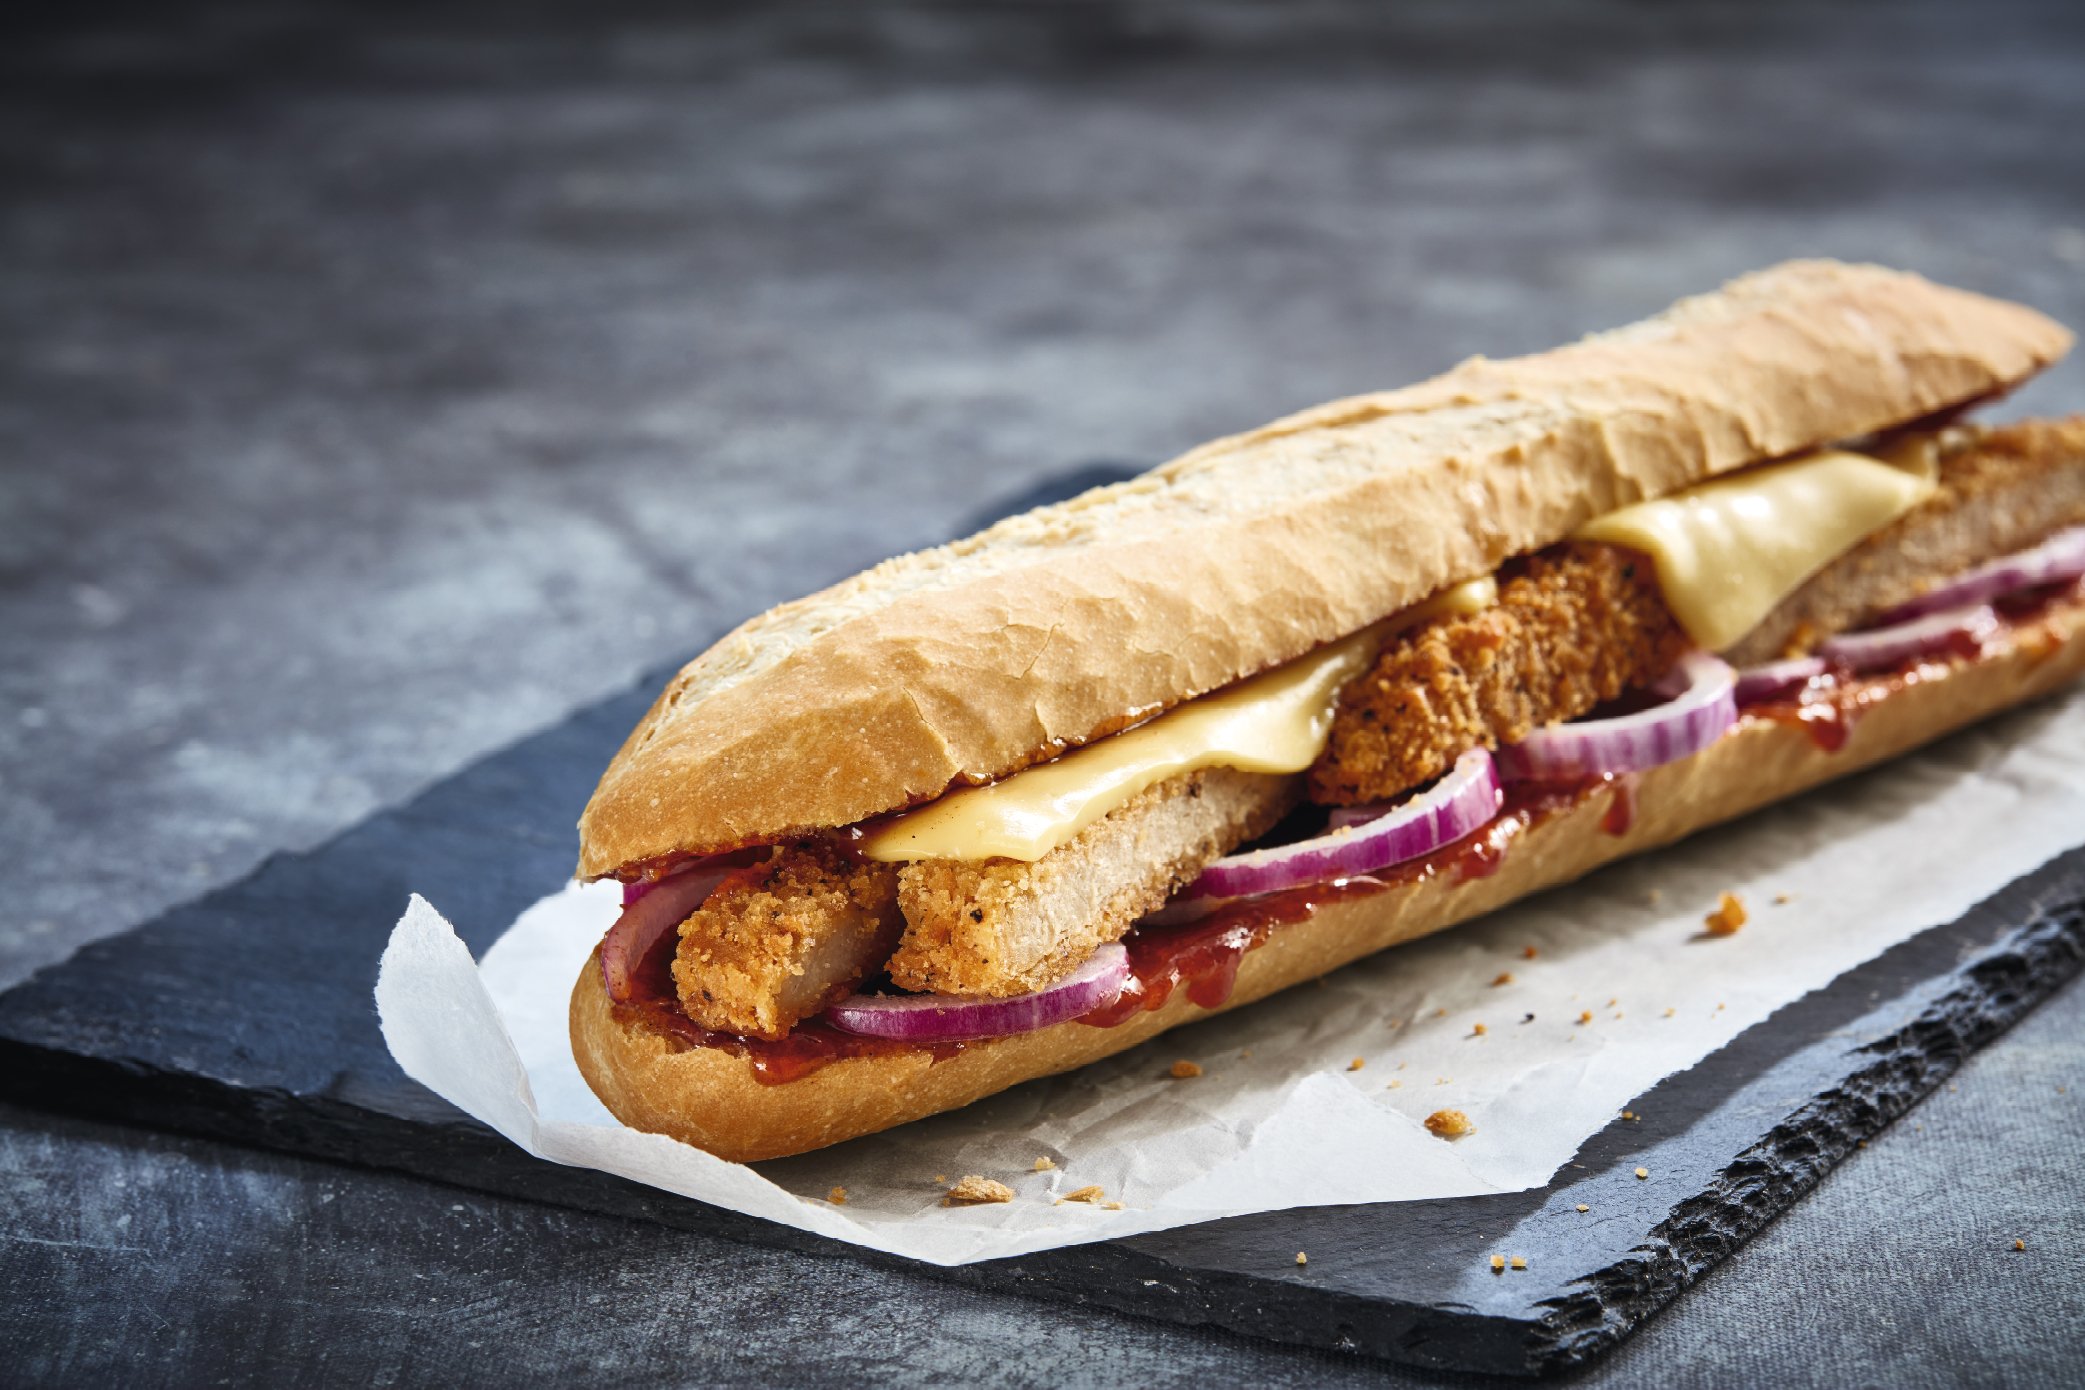 The Greggs Vegen Chicken-Free Baguette with dairy-free cheese